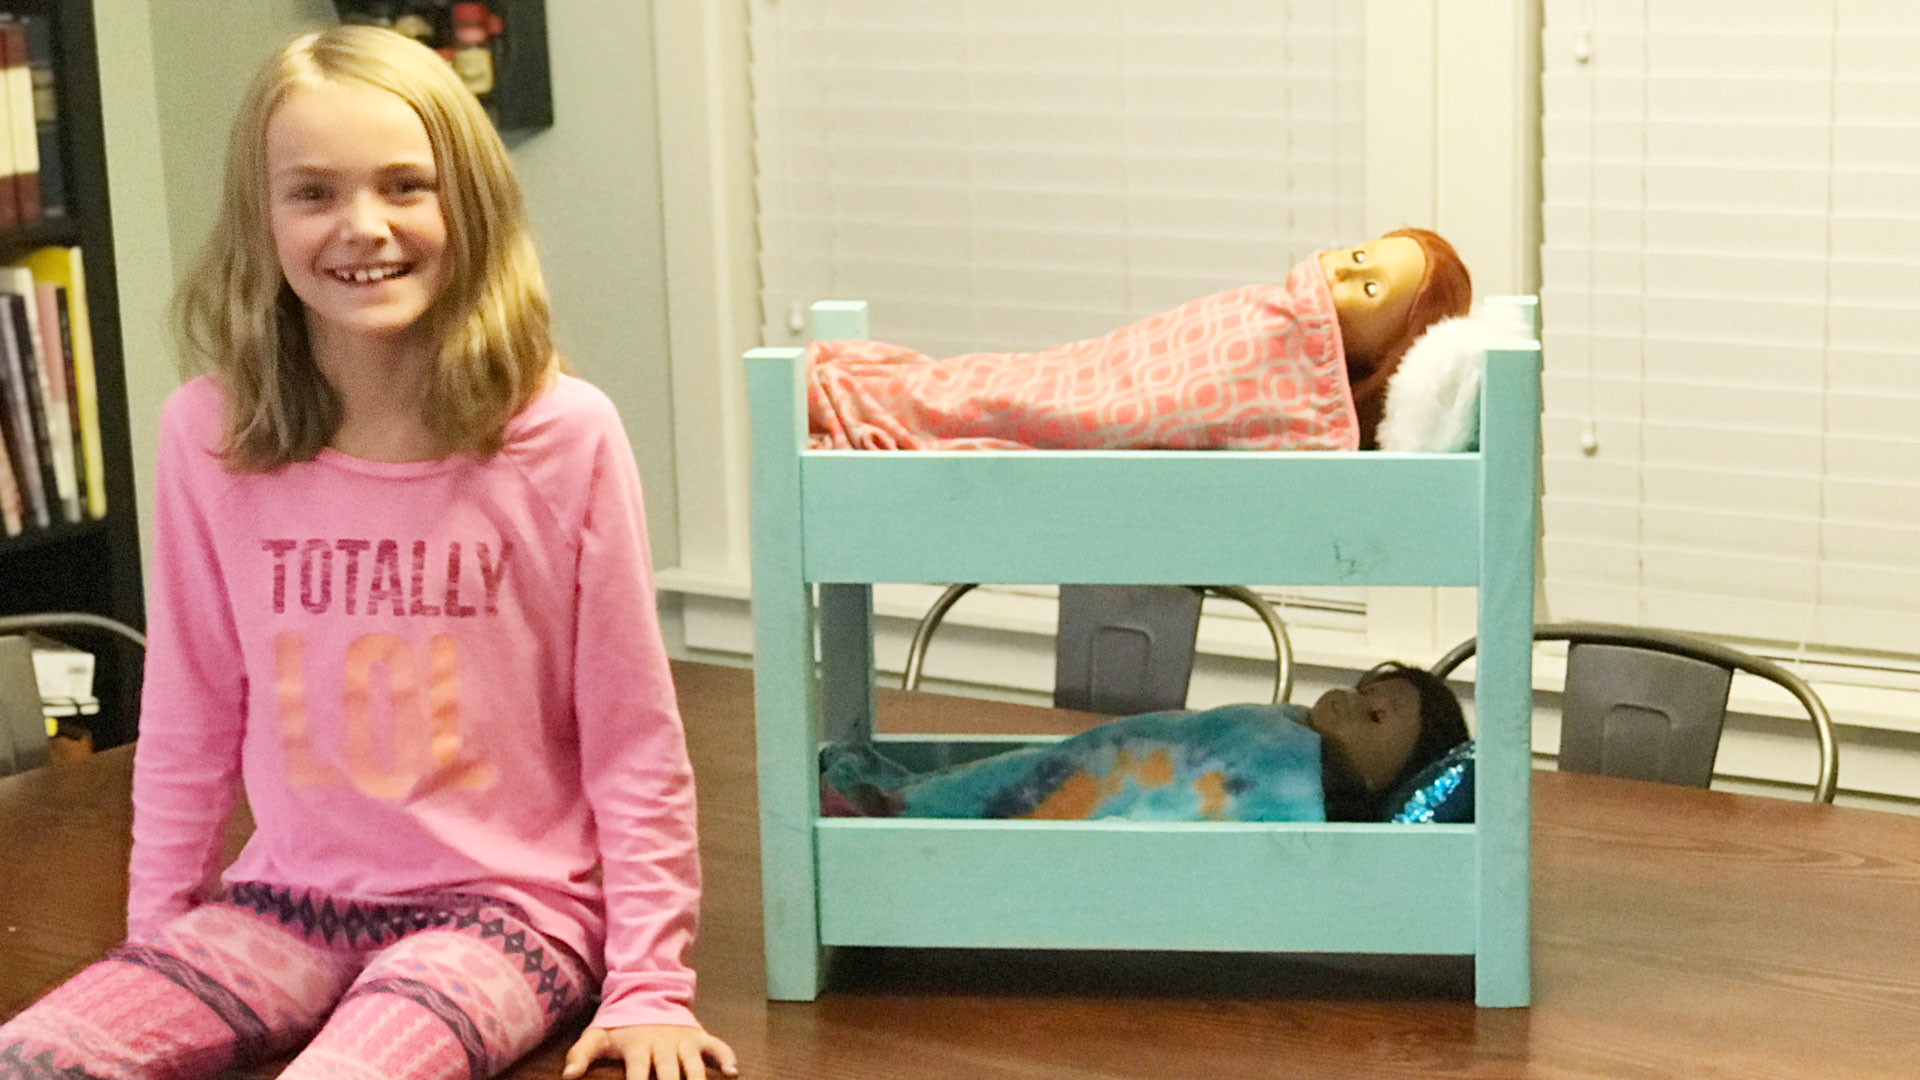 Build An American Girl Doll Bunk Bed, How To Make A Doll Bunk Bed